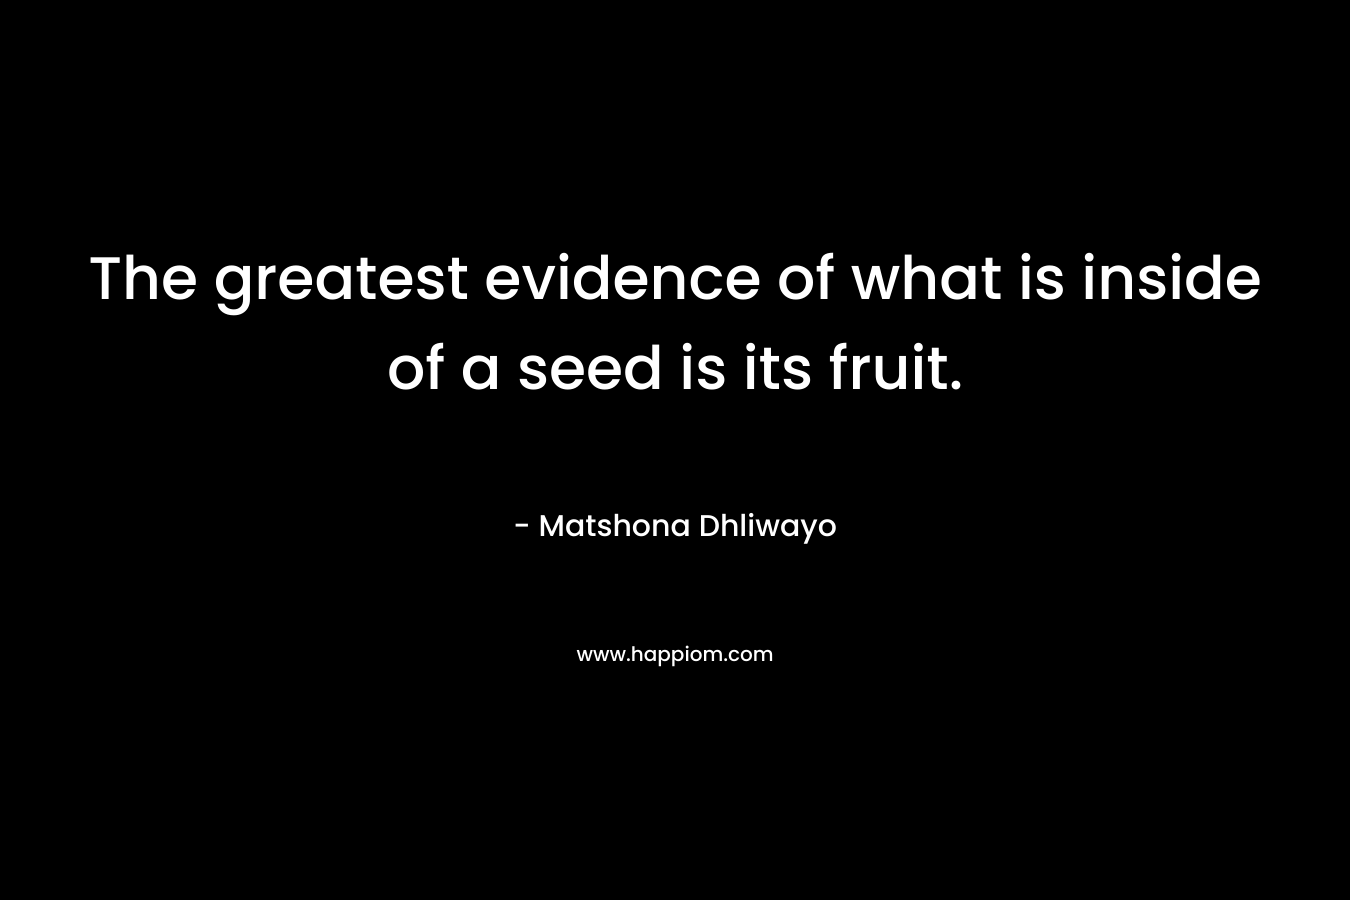 The greatest evidence of what is inside of a seed is its fruit.